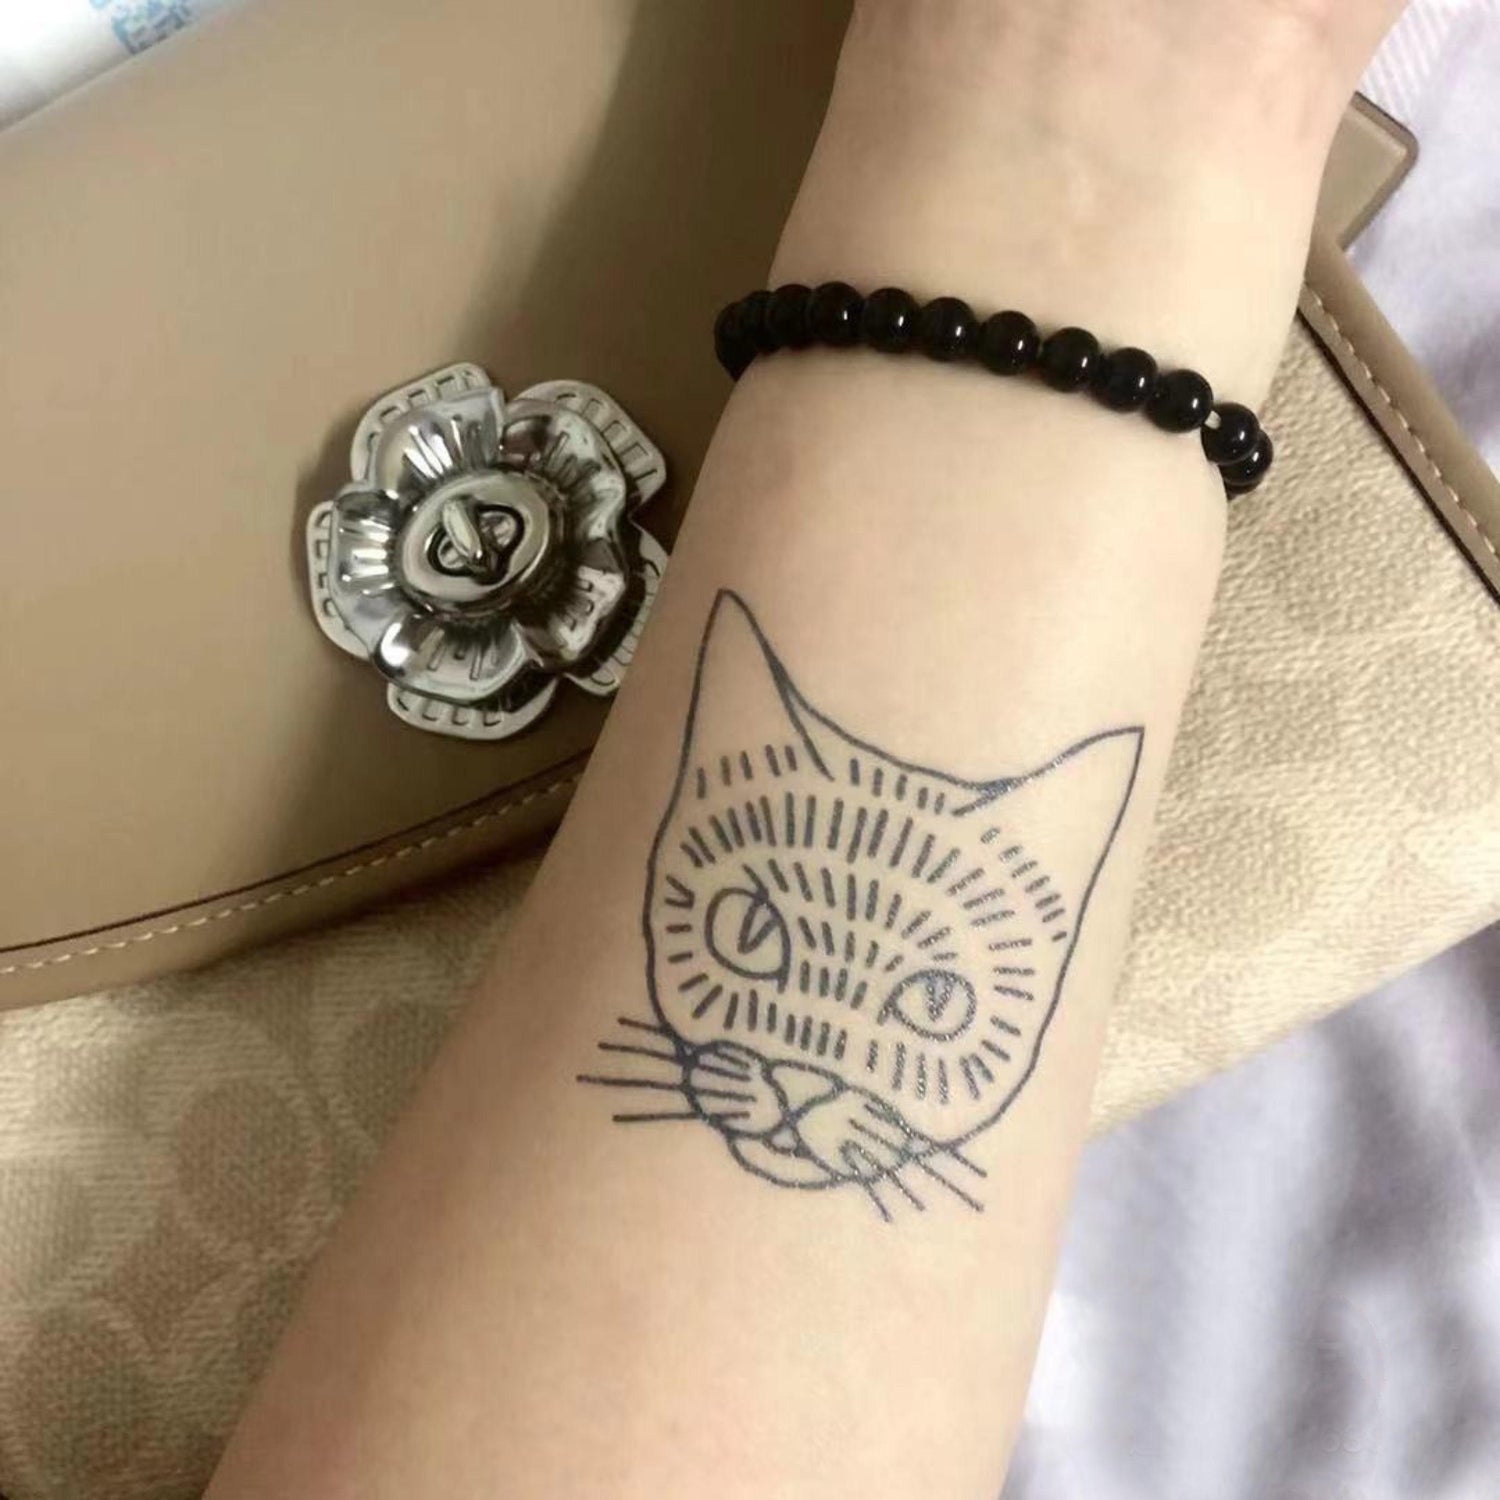 Buy Custom temporary tattoos | Fake removable customized tattoo personalized  designs | Order temp tats of your logo. Last 2-5 days & go on with water.  Removeable party sticker decals Online at desertcartINDIA